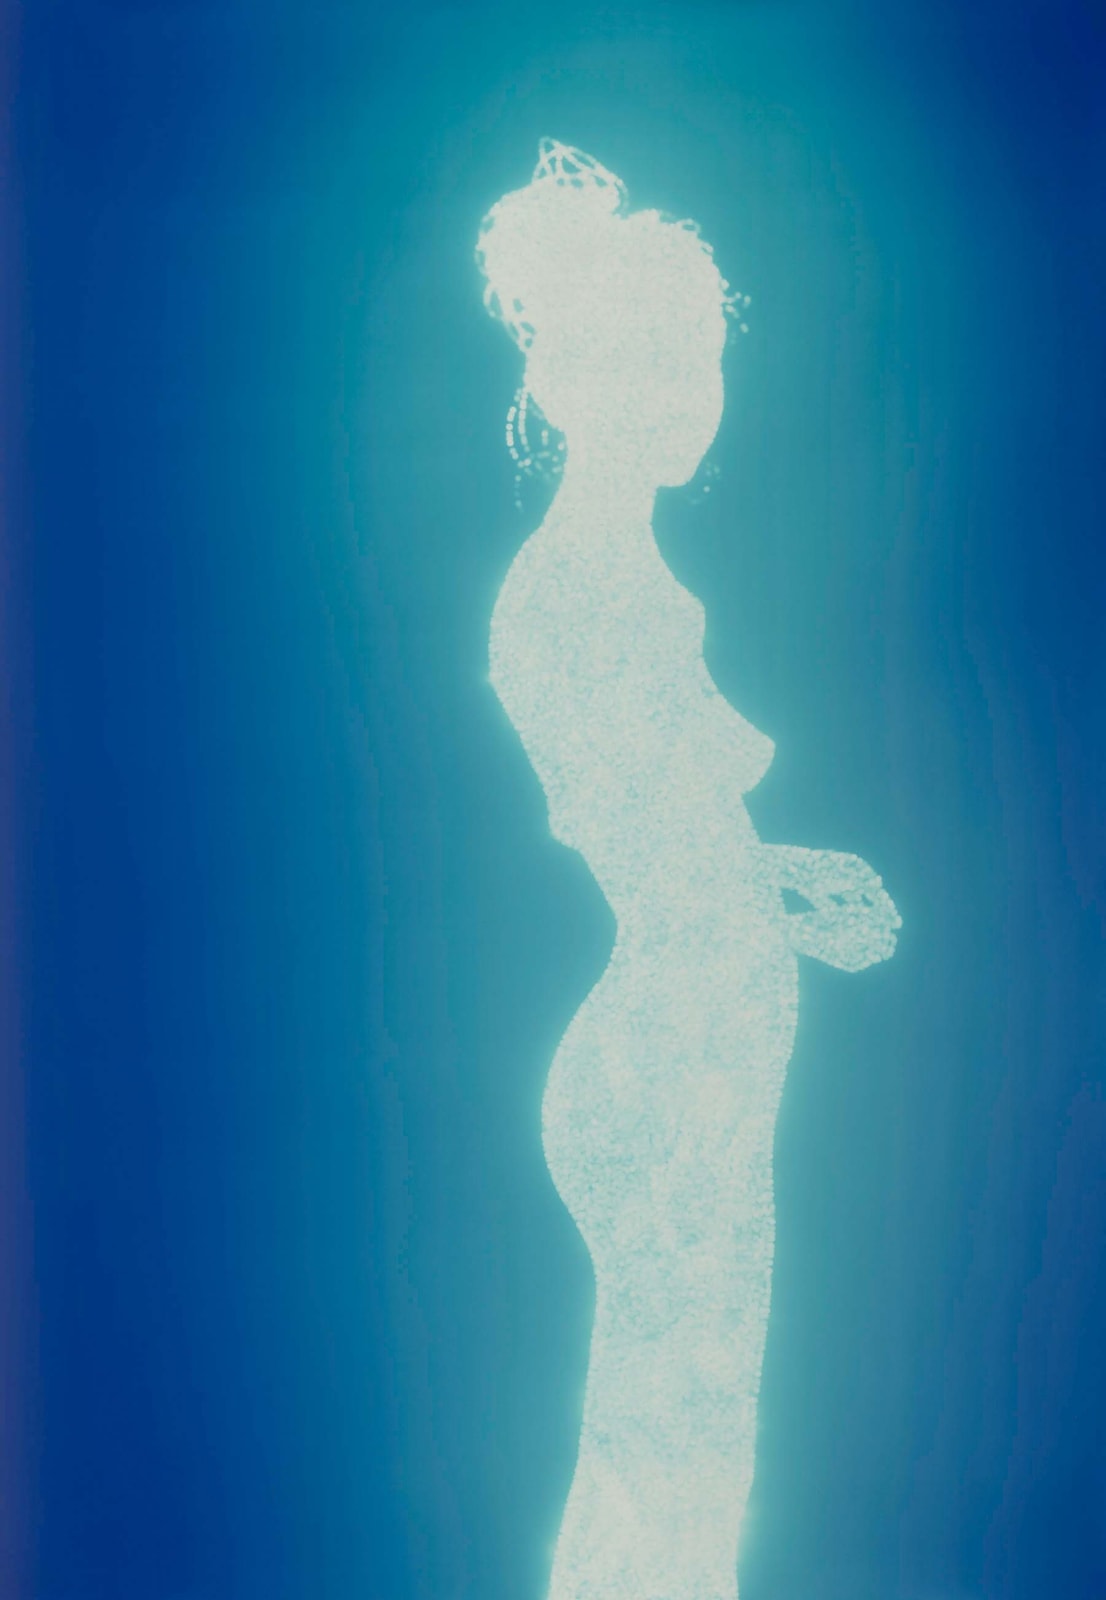 Christopher Bucklow Tetrarch, 11.06am, 9th June silhouette of nude woman in light coming through blue background